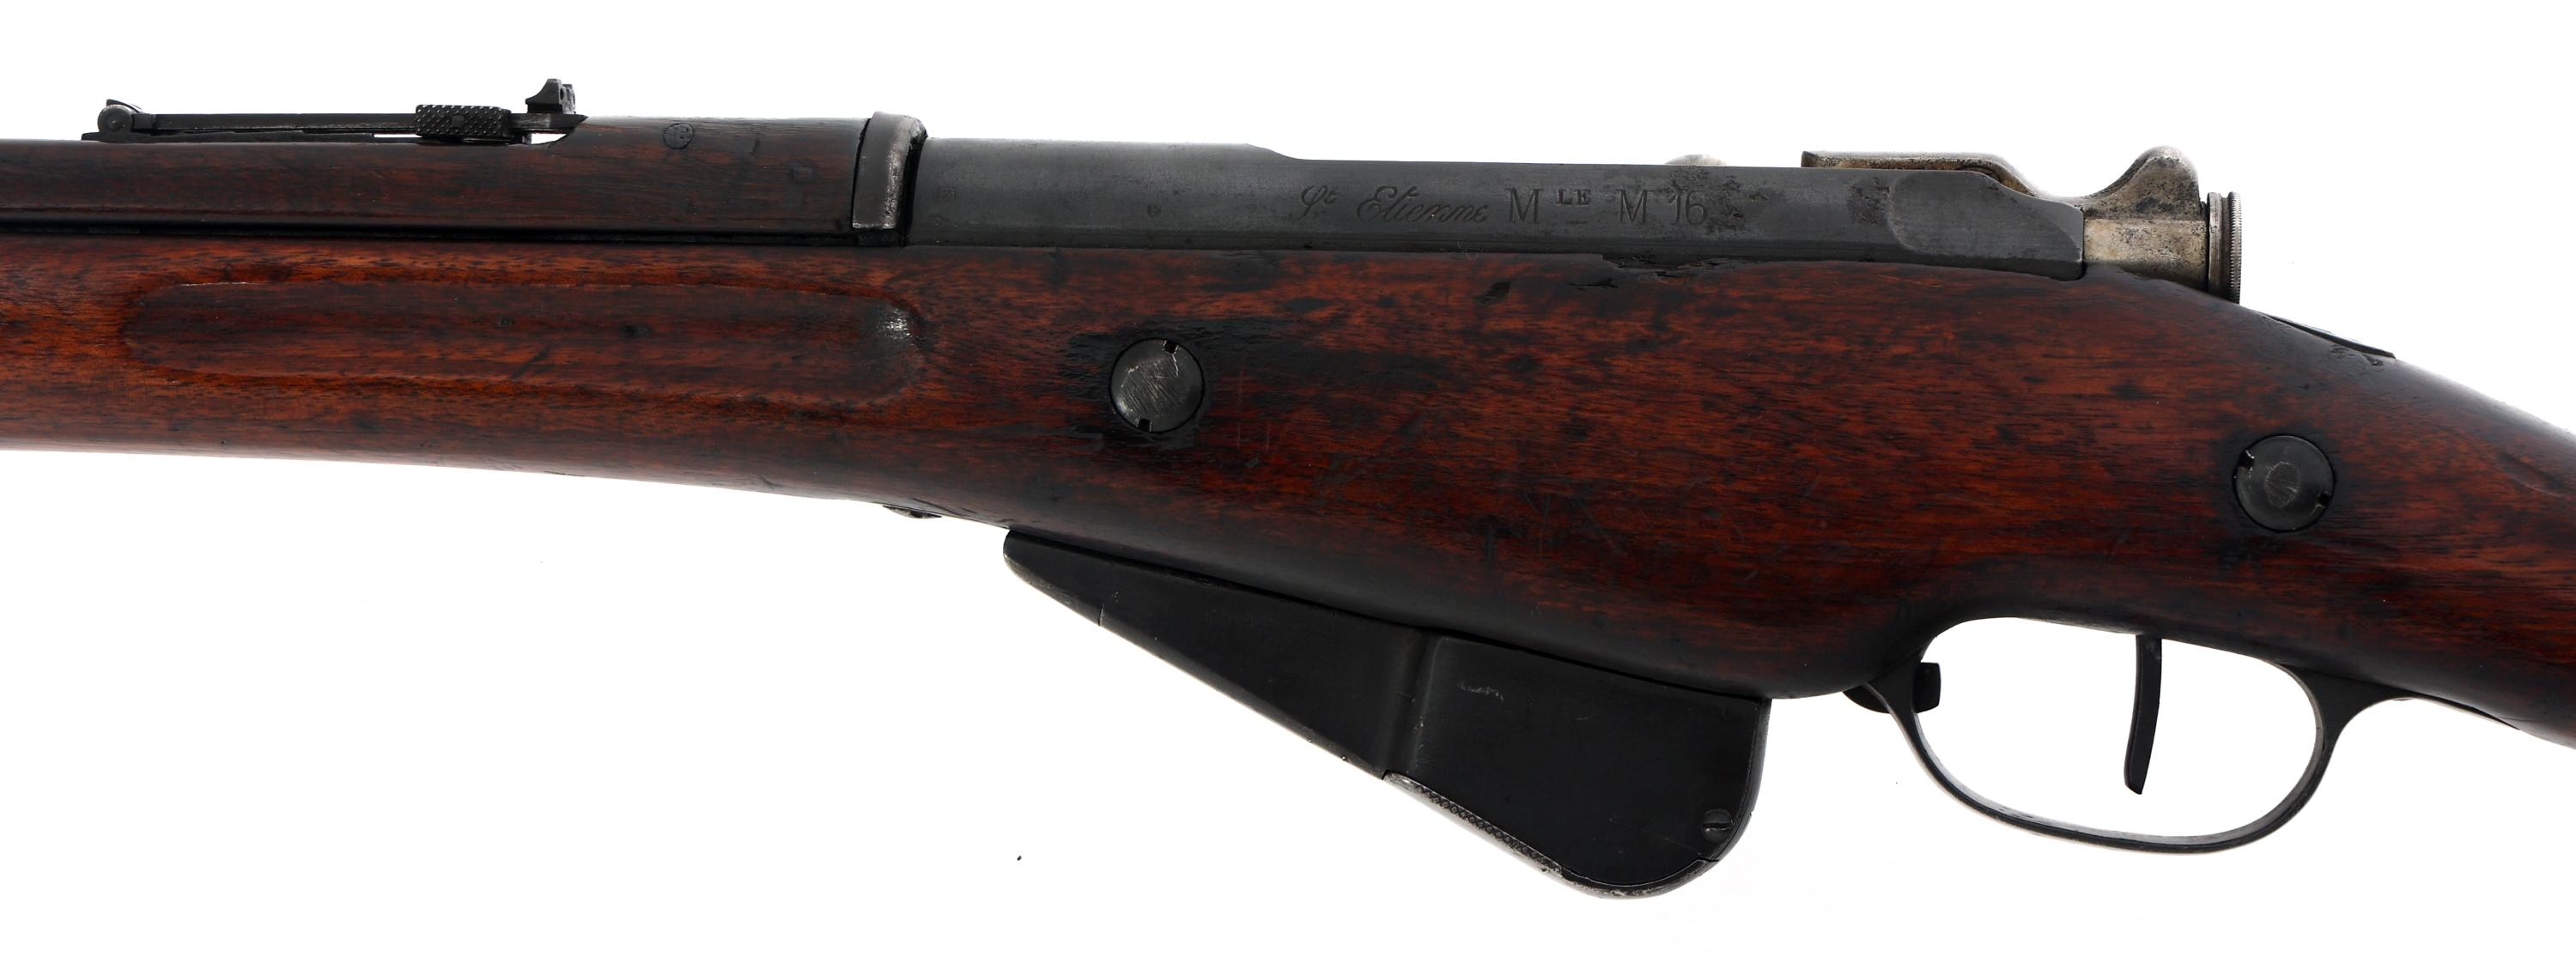 FRENCH ST ETIENNE MODEL M16 8x50mm CALIBER RIFLE